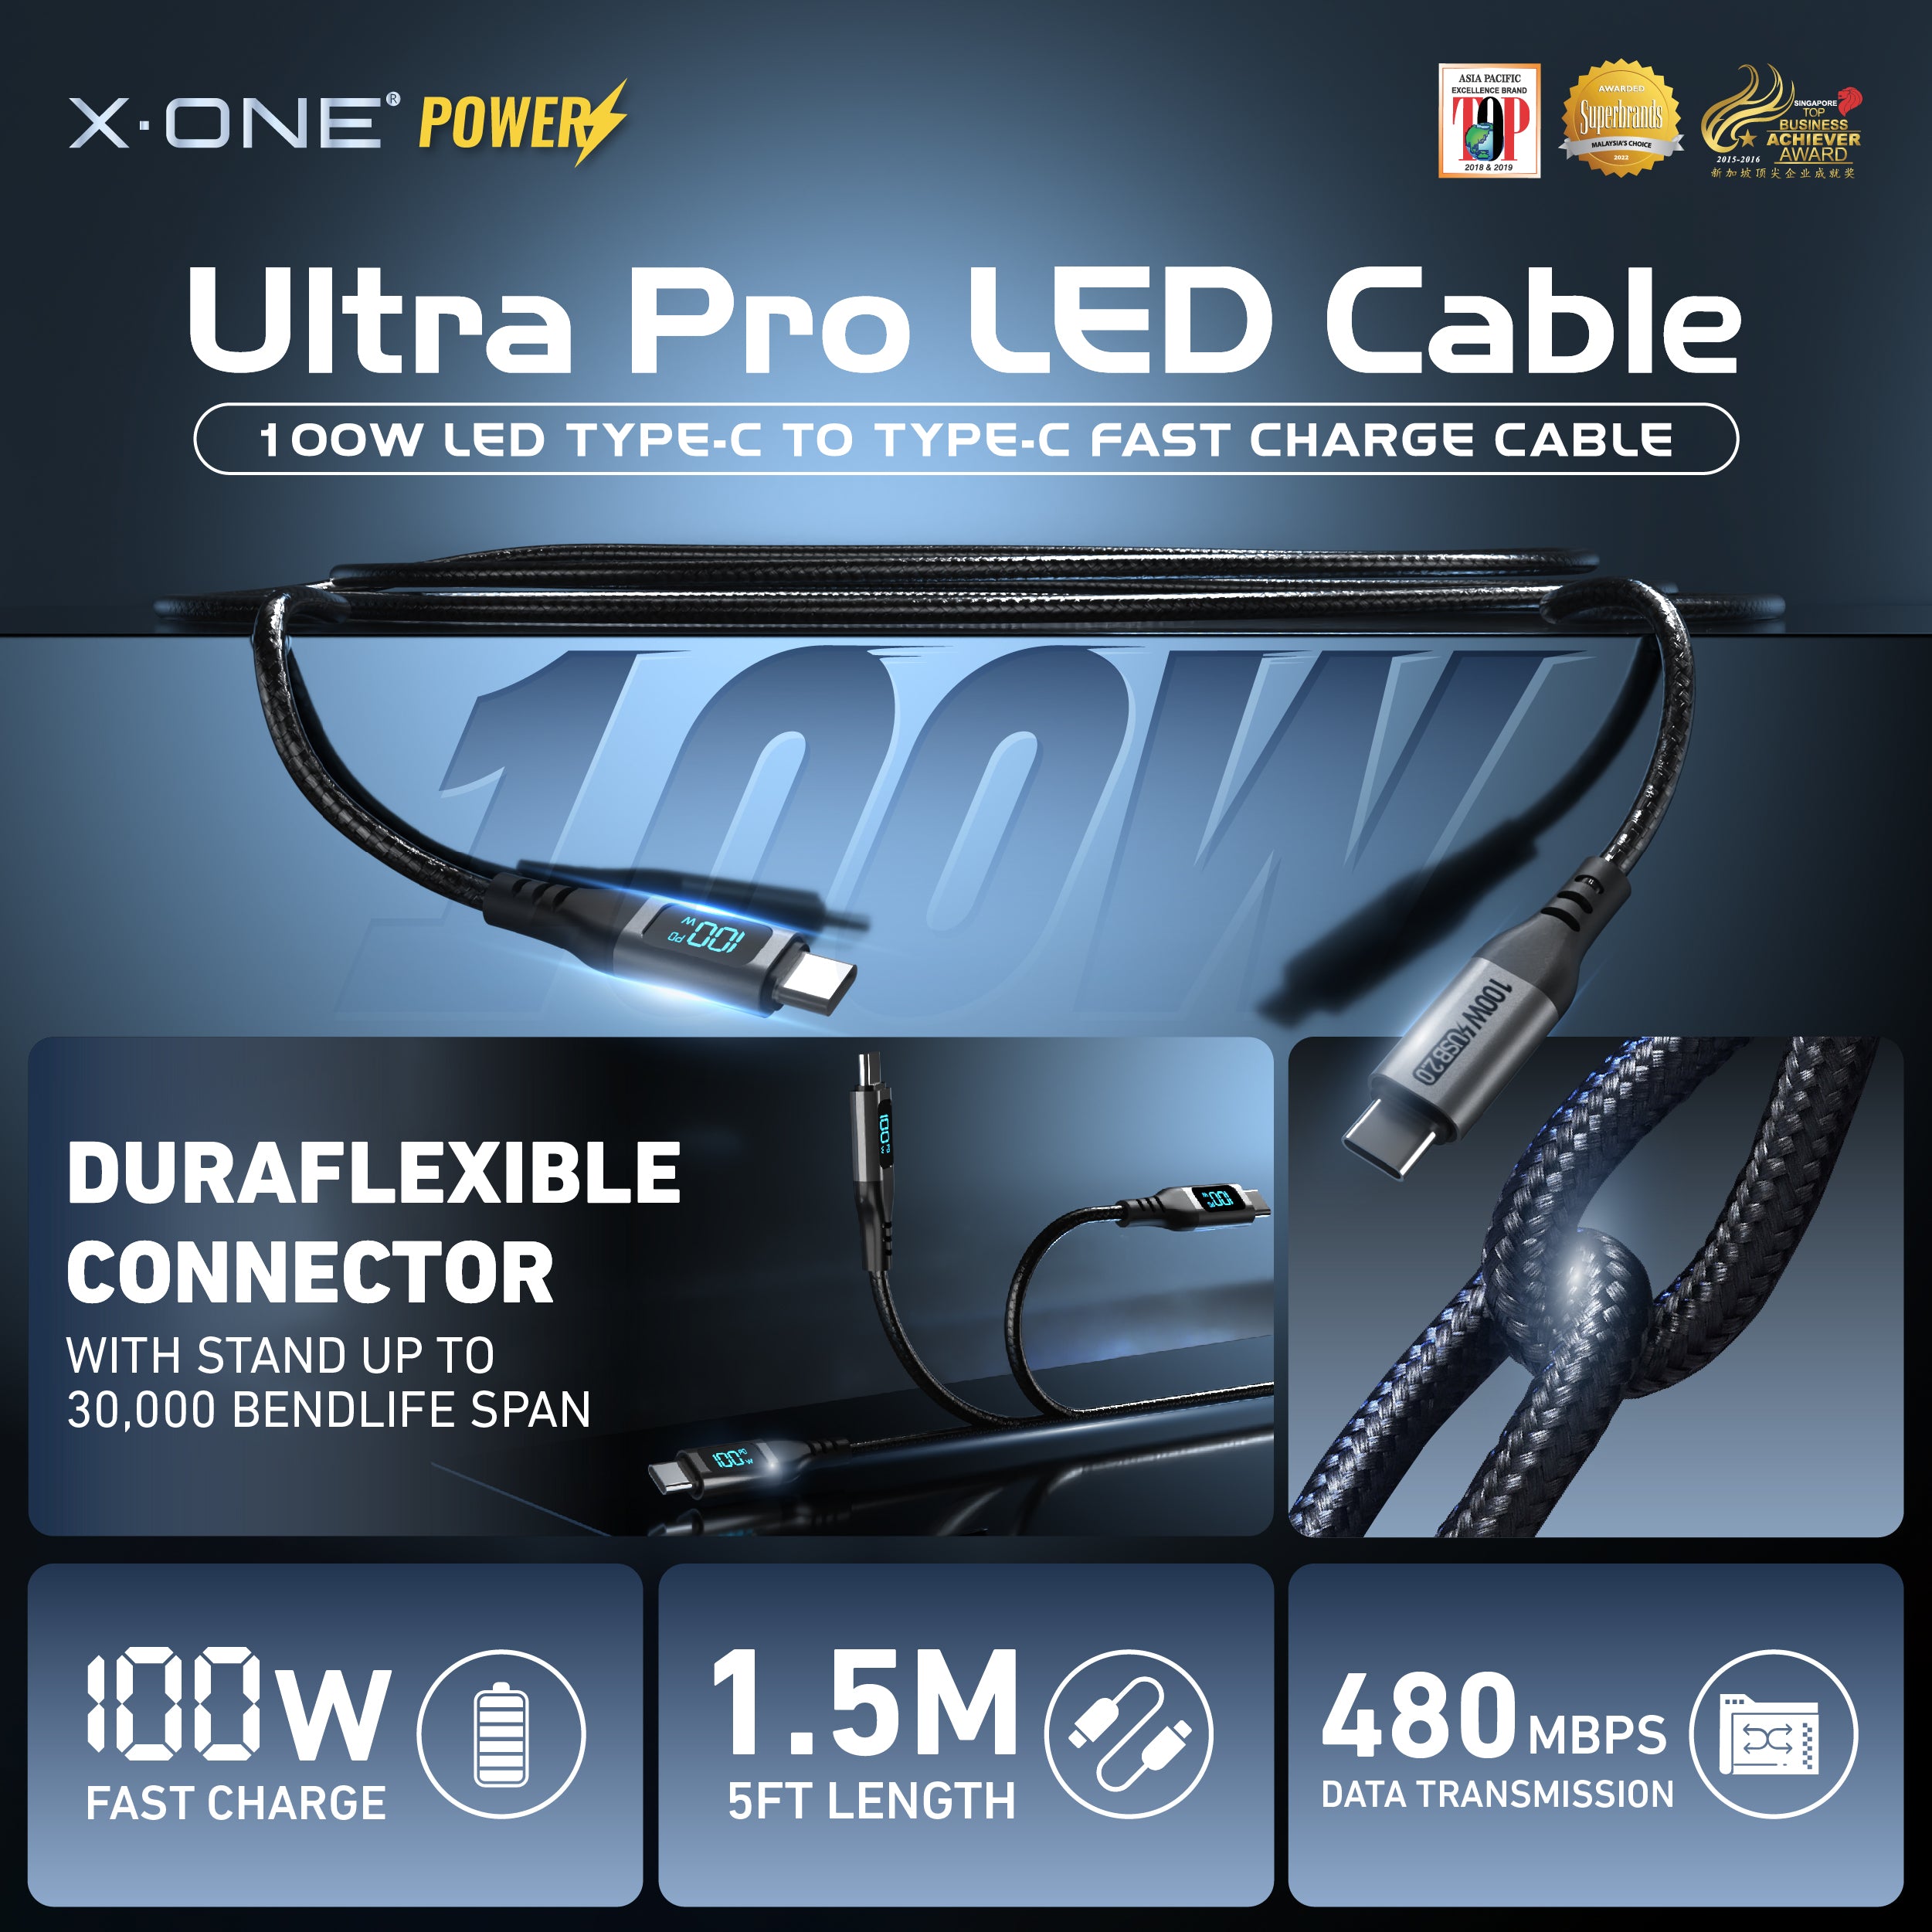 #cable_1.5M (100W) - LED